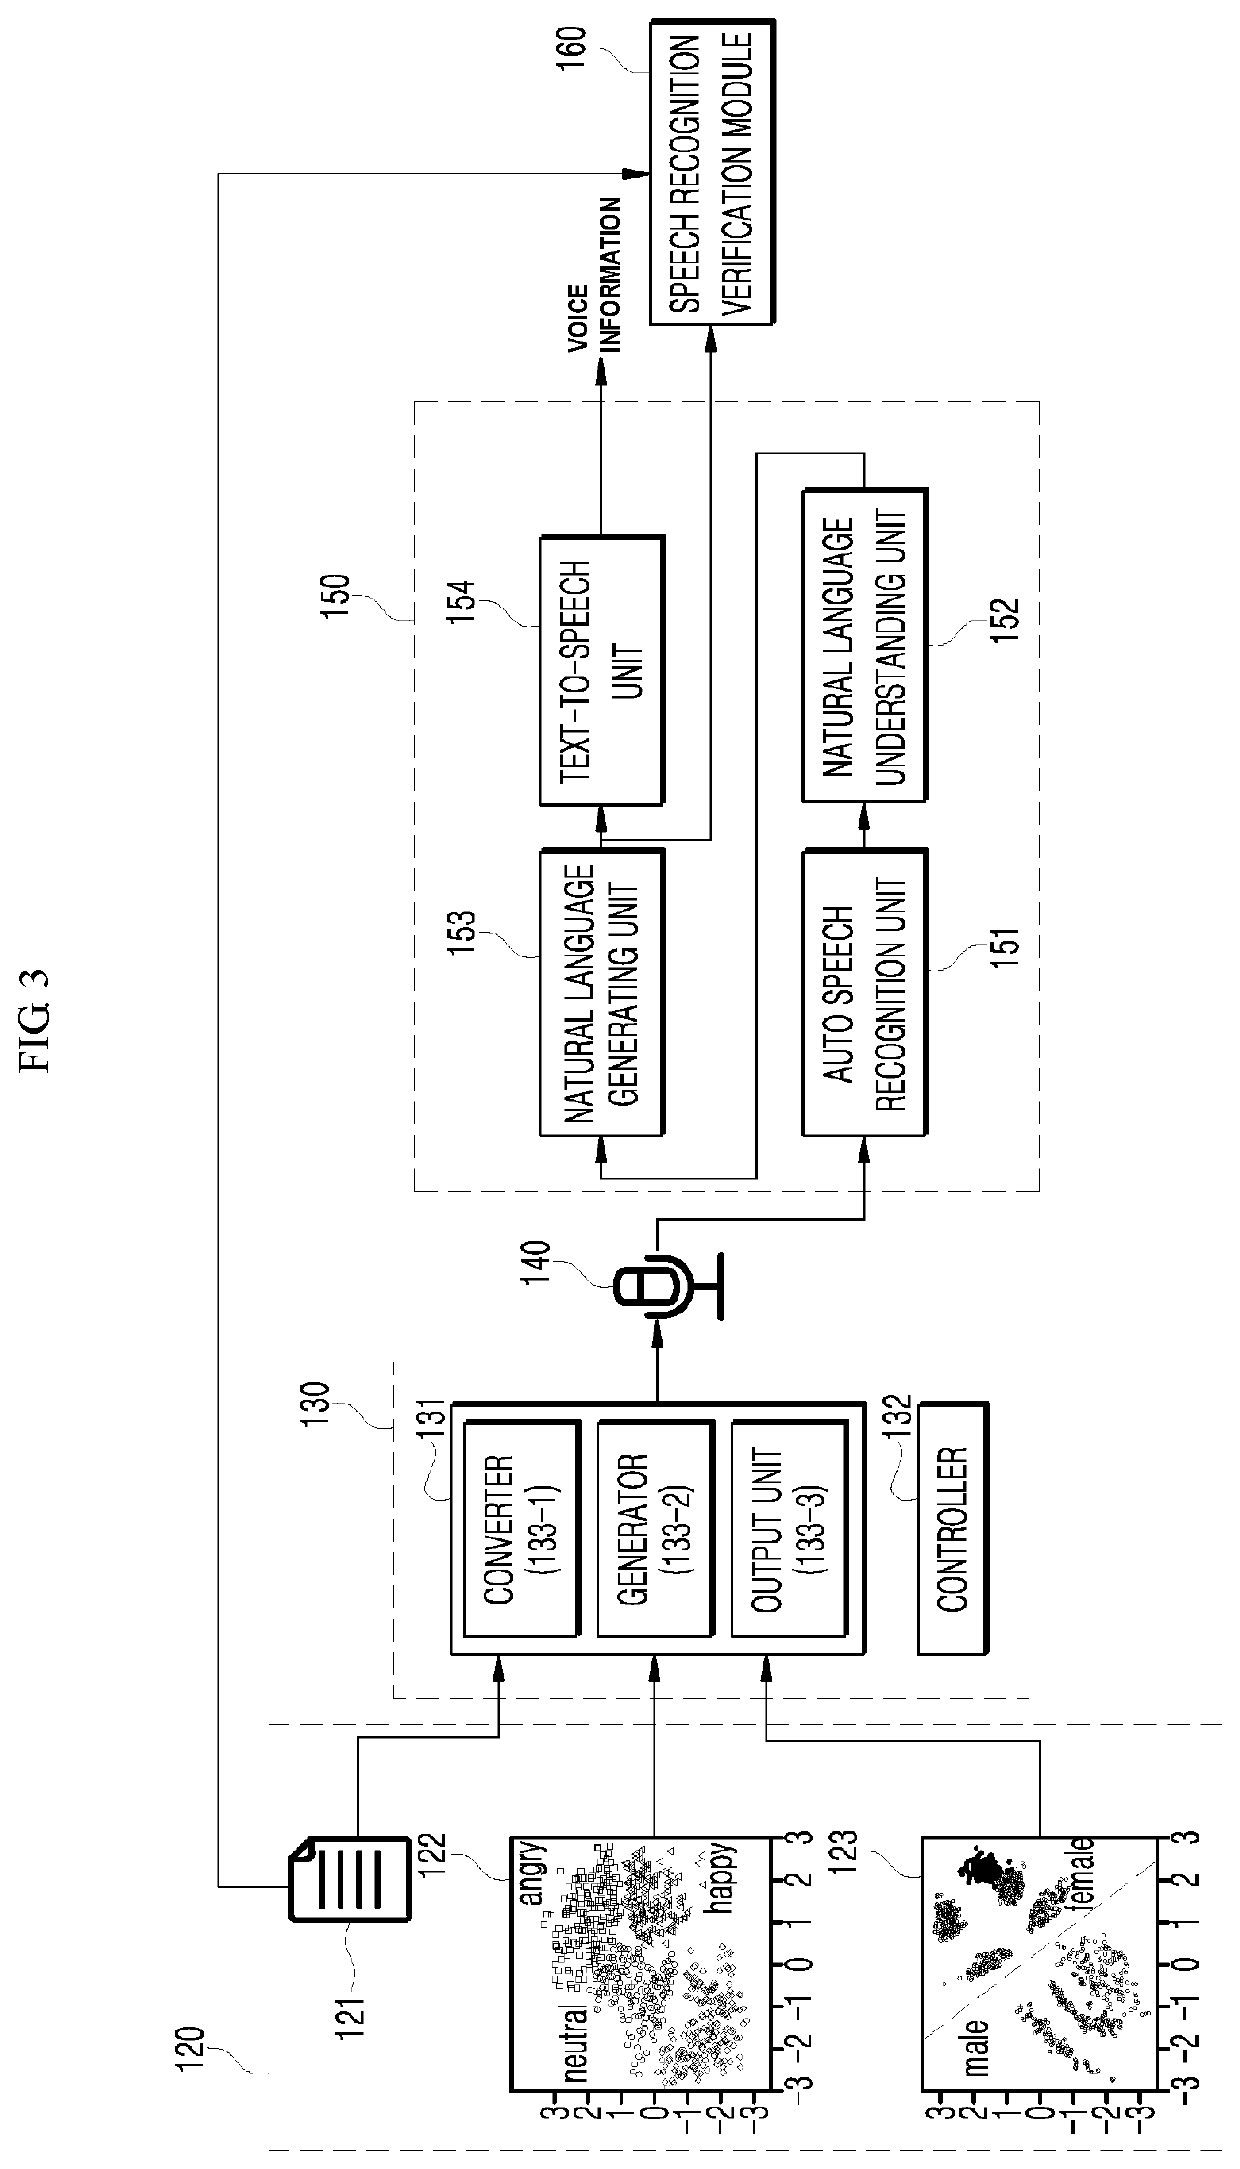 Apparatus and method for inspecting speech recognition